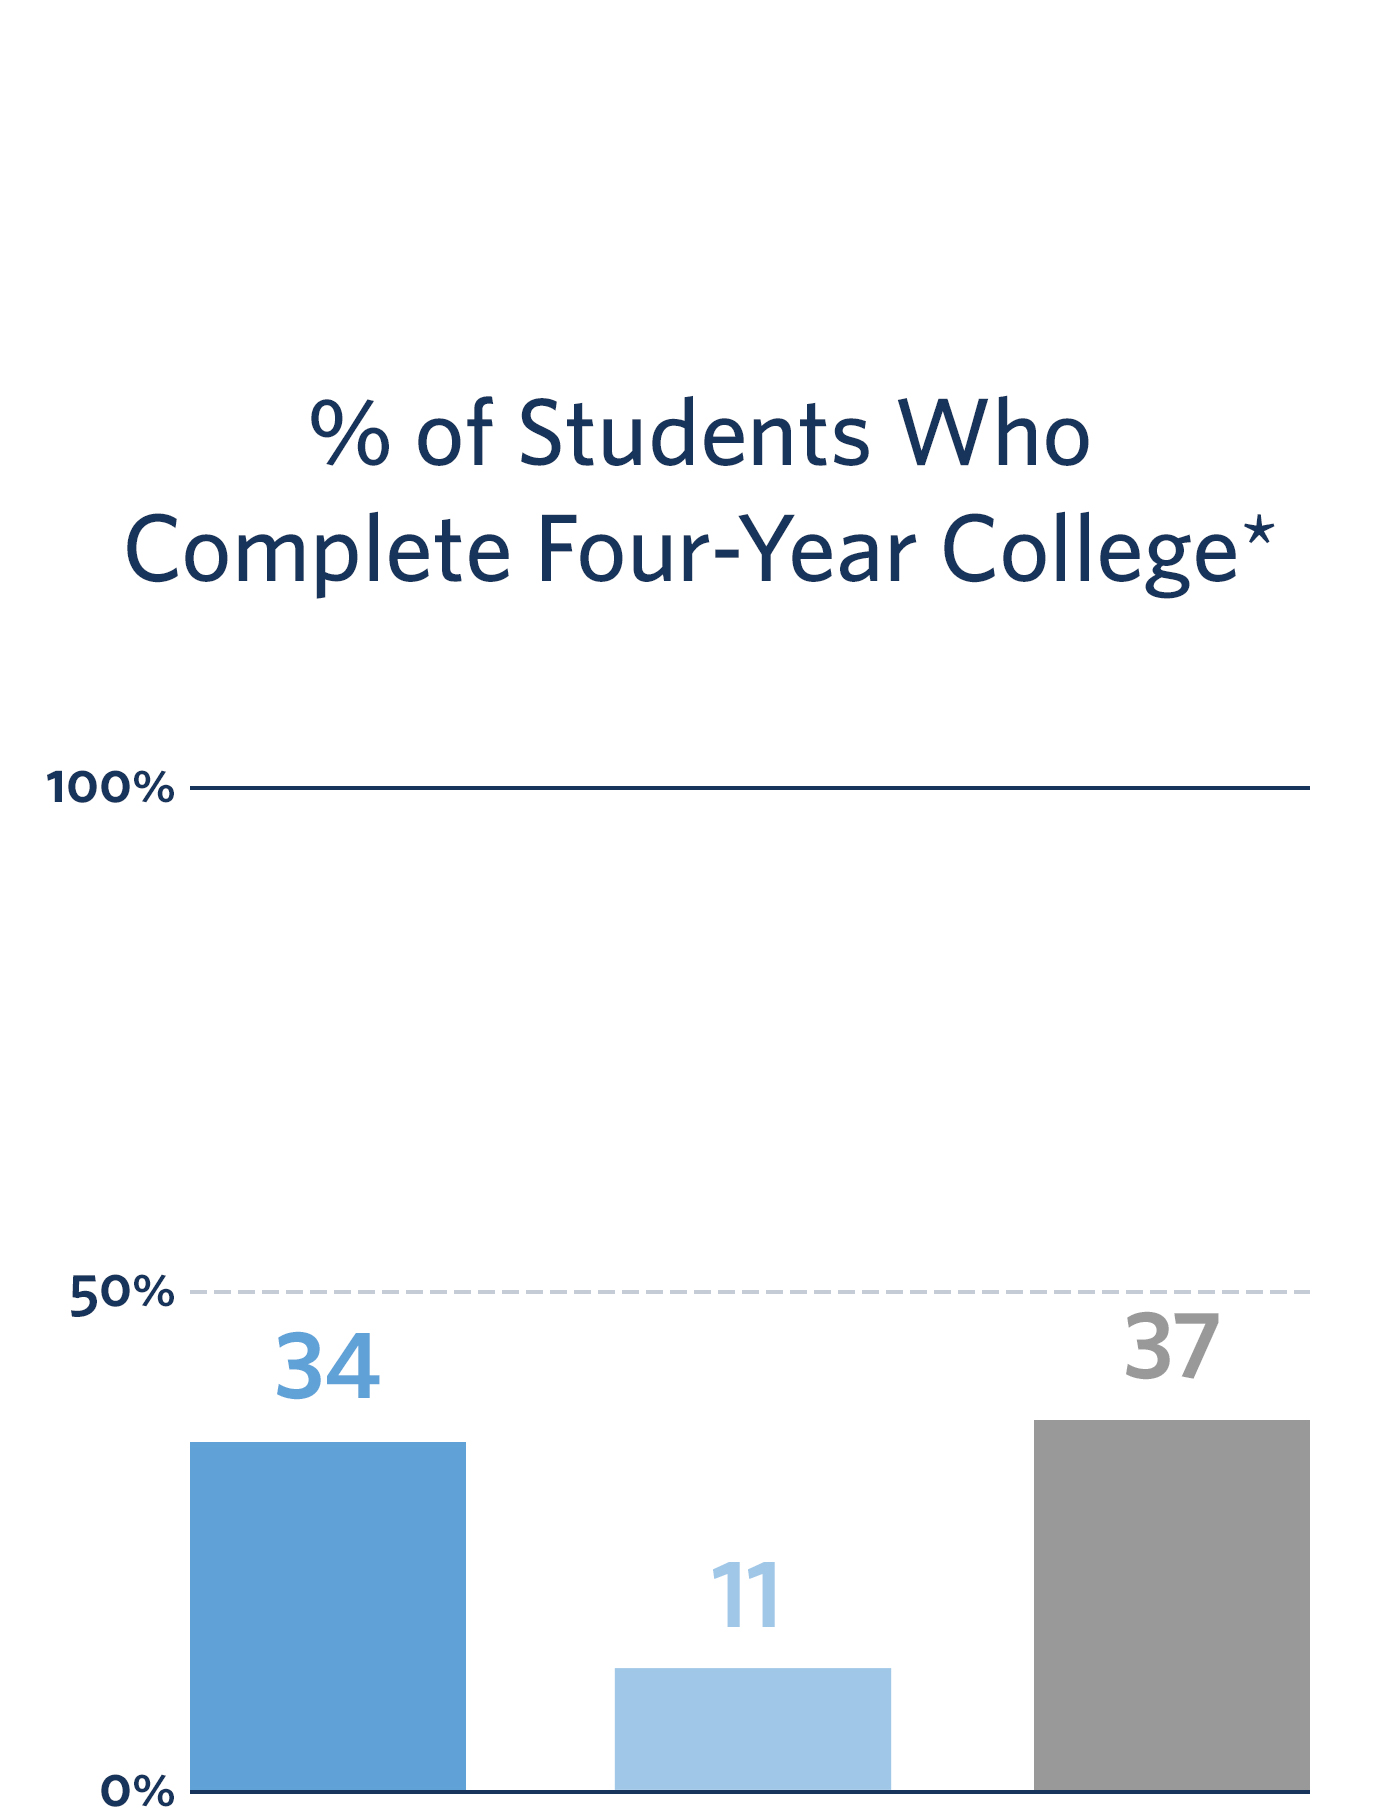 Percentage of Students Who Complete Four-Year College: 35% KIPP Average, 11% Low-Income Average, 37% U.S. Average